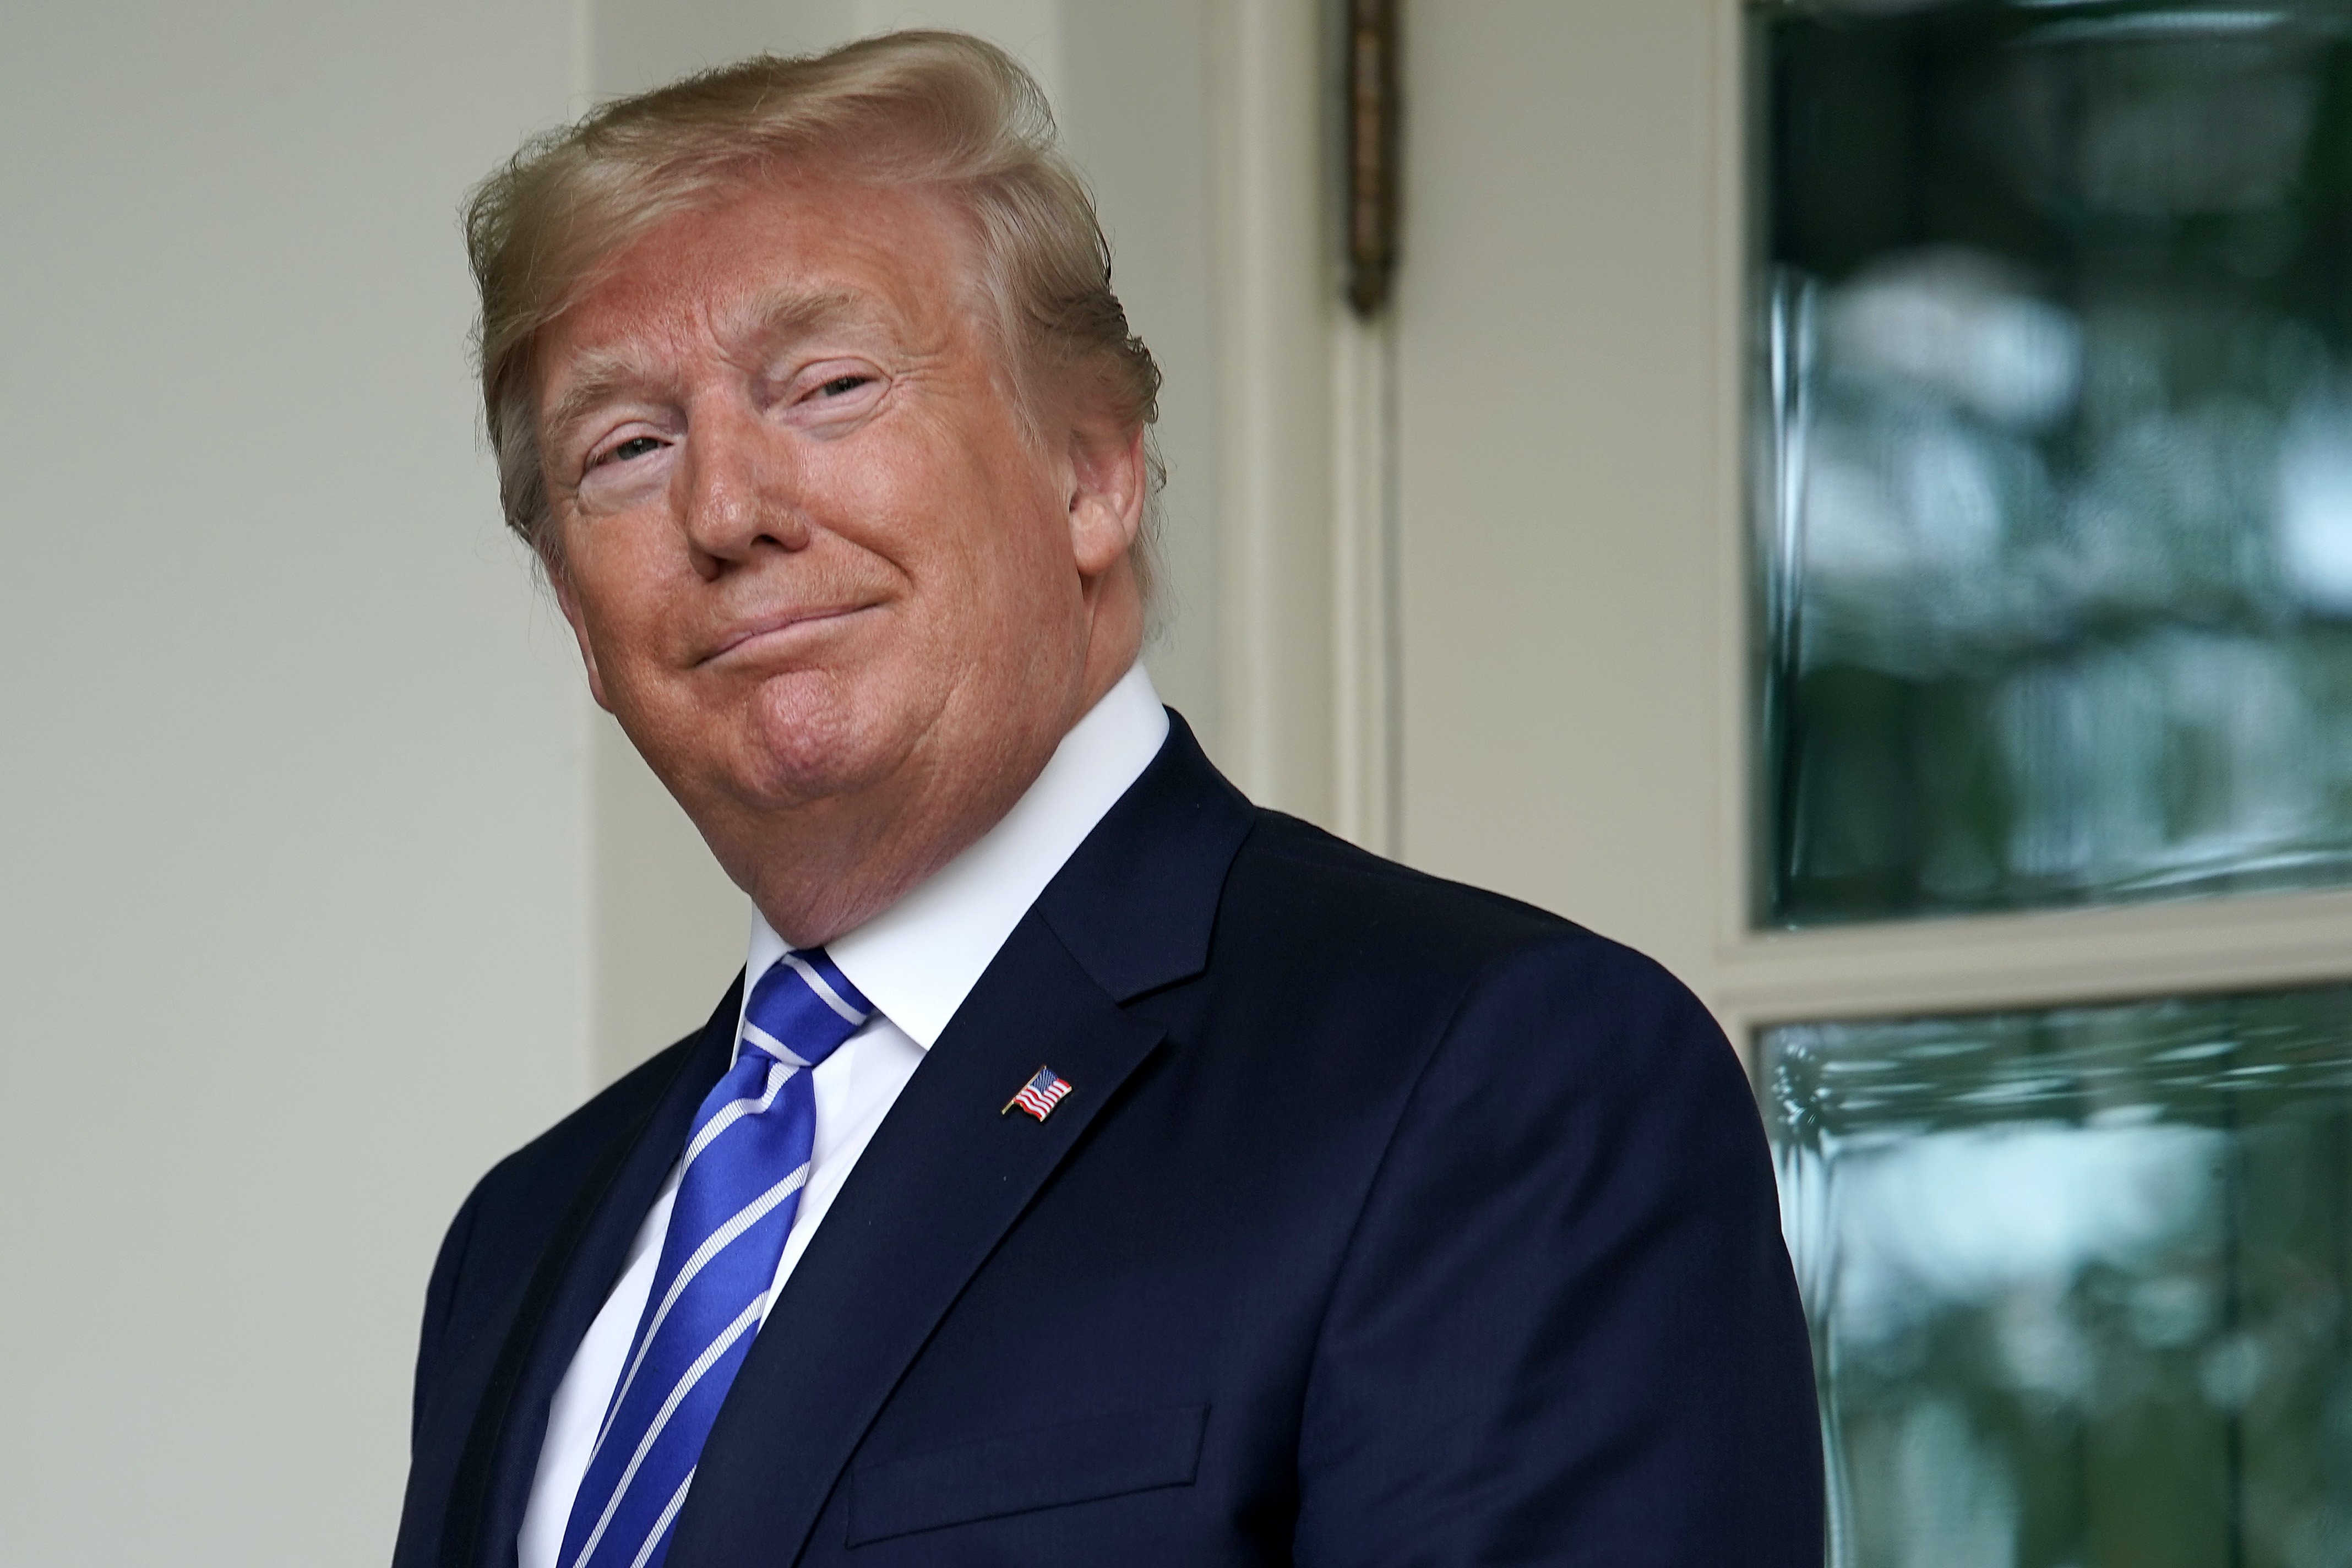 Donald Trump looks back at journalists after welcoming Mongolian President Battulga Khaltmaa to the White House July 31, 2019 | Photo: GettyImages